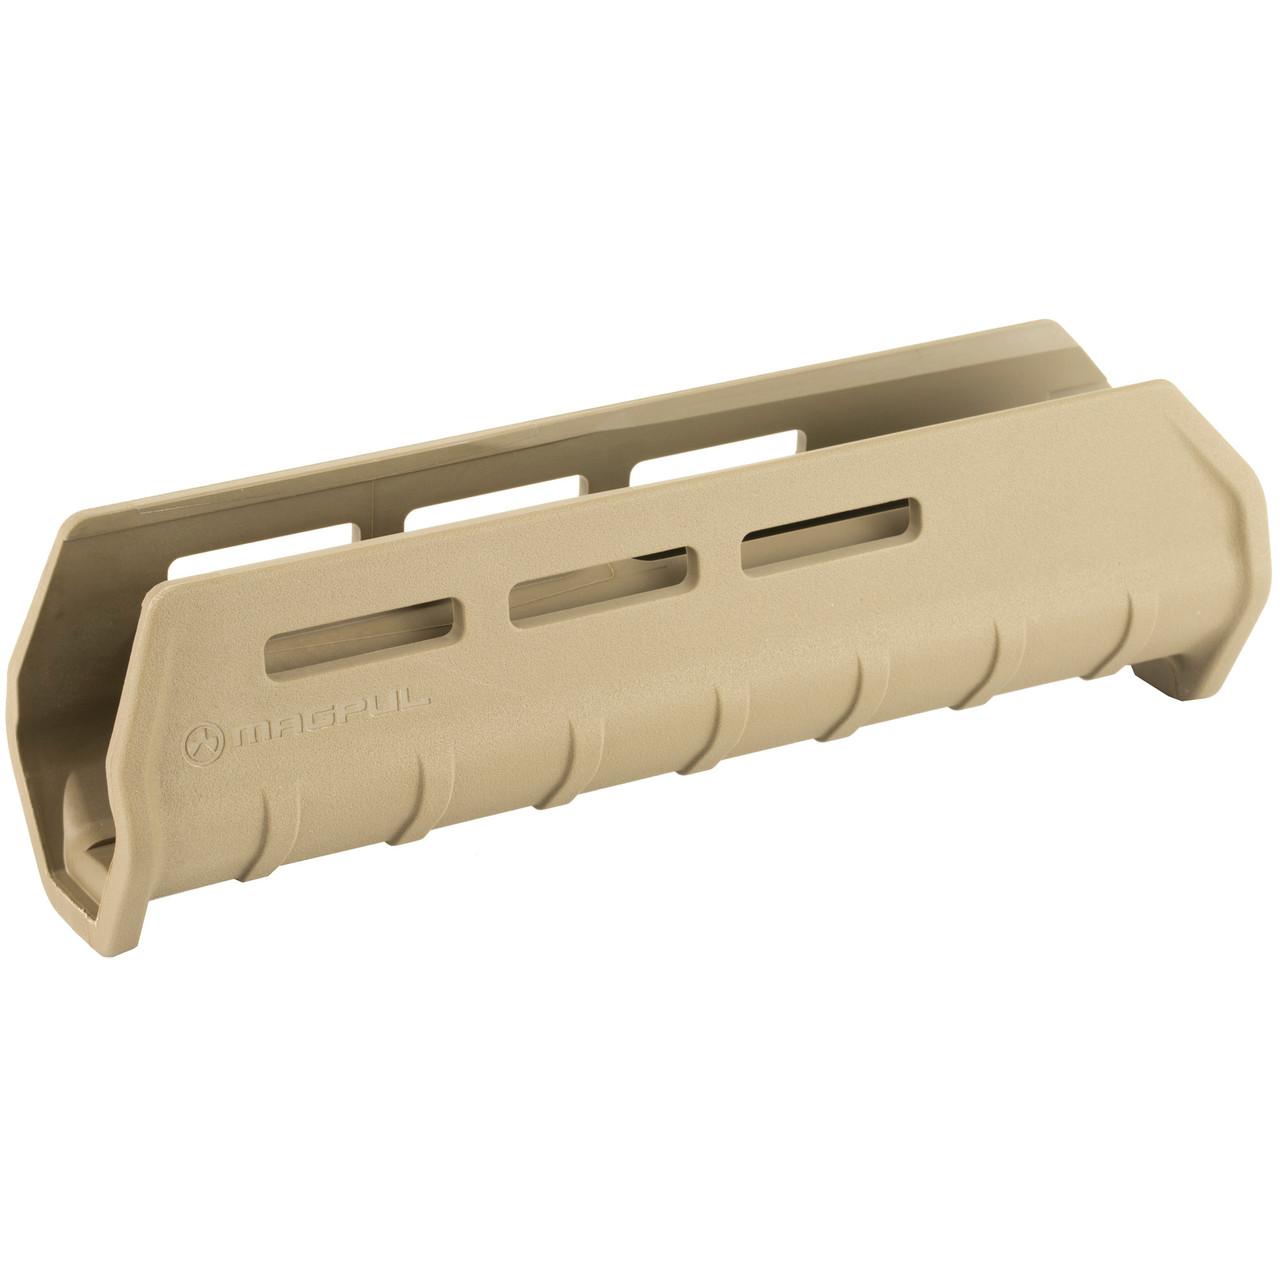 Magpul Industries MAG494-FDE Moe M-lok Forend Moss 590 Fde